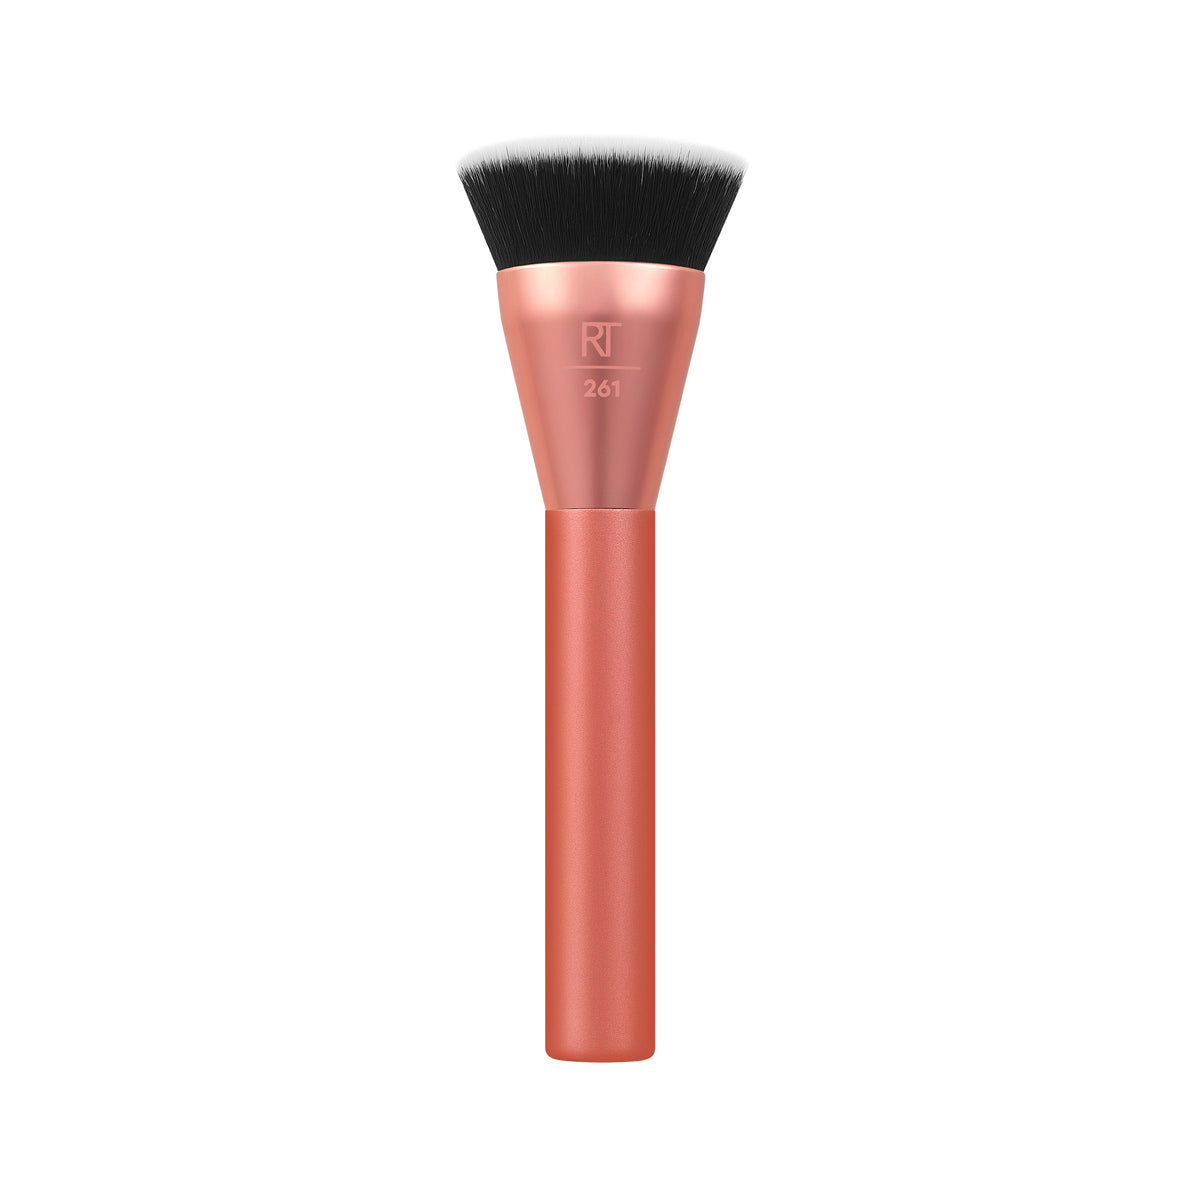  Real Techniques Sculpt & Shape Dual Ended Makeup Brush, 2-in-1 Sculpting  Brush, Contours Cheek, Nose, & Eyes, Flat Head Blends & Intensifies Contour  or Highlighter, Vegan & Cruelty Free, 1 Count 